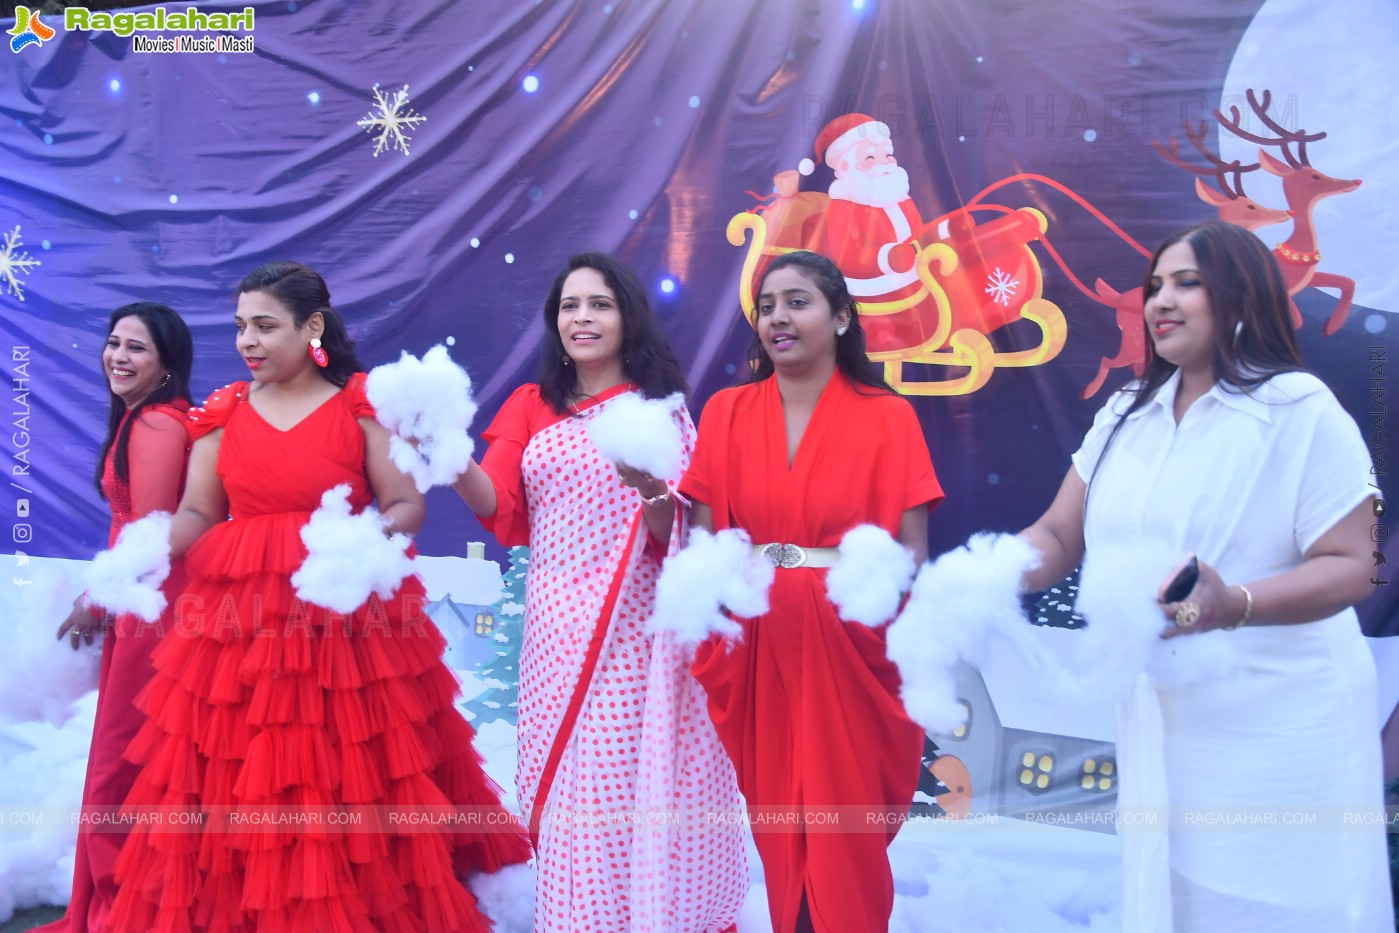 Christmas Carnival: The Celebrity Meet & Greet and Traditional Cake Mix Ceremony